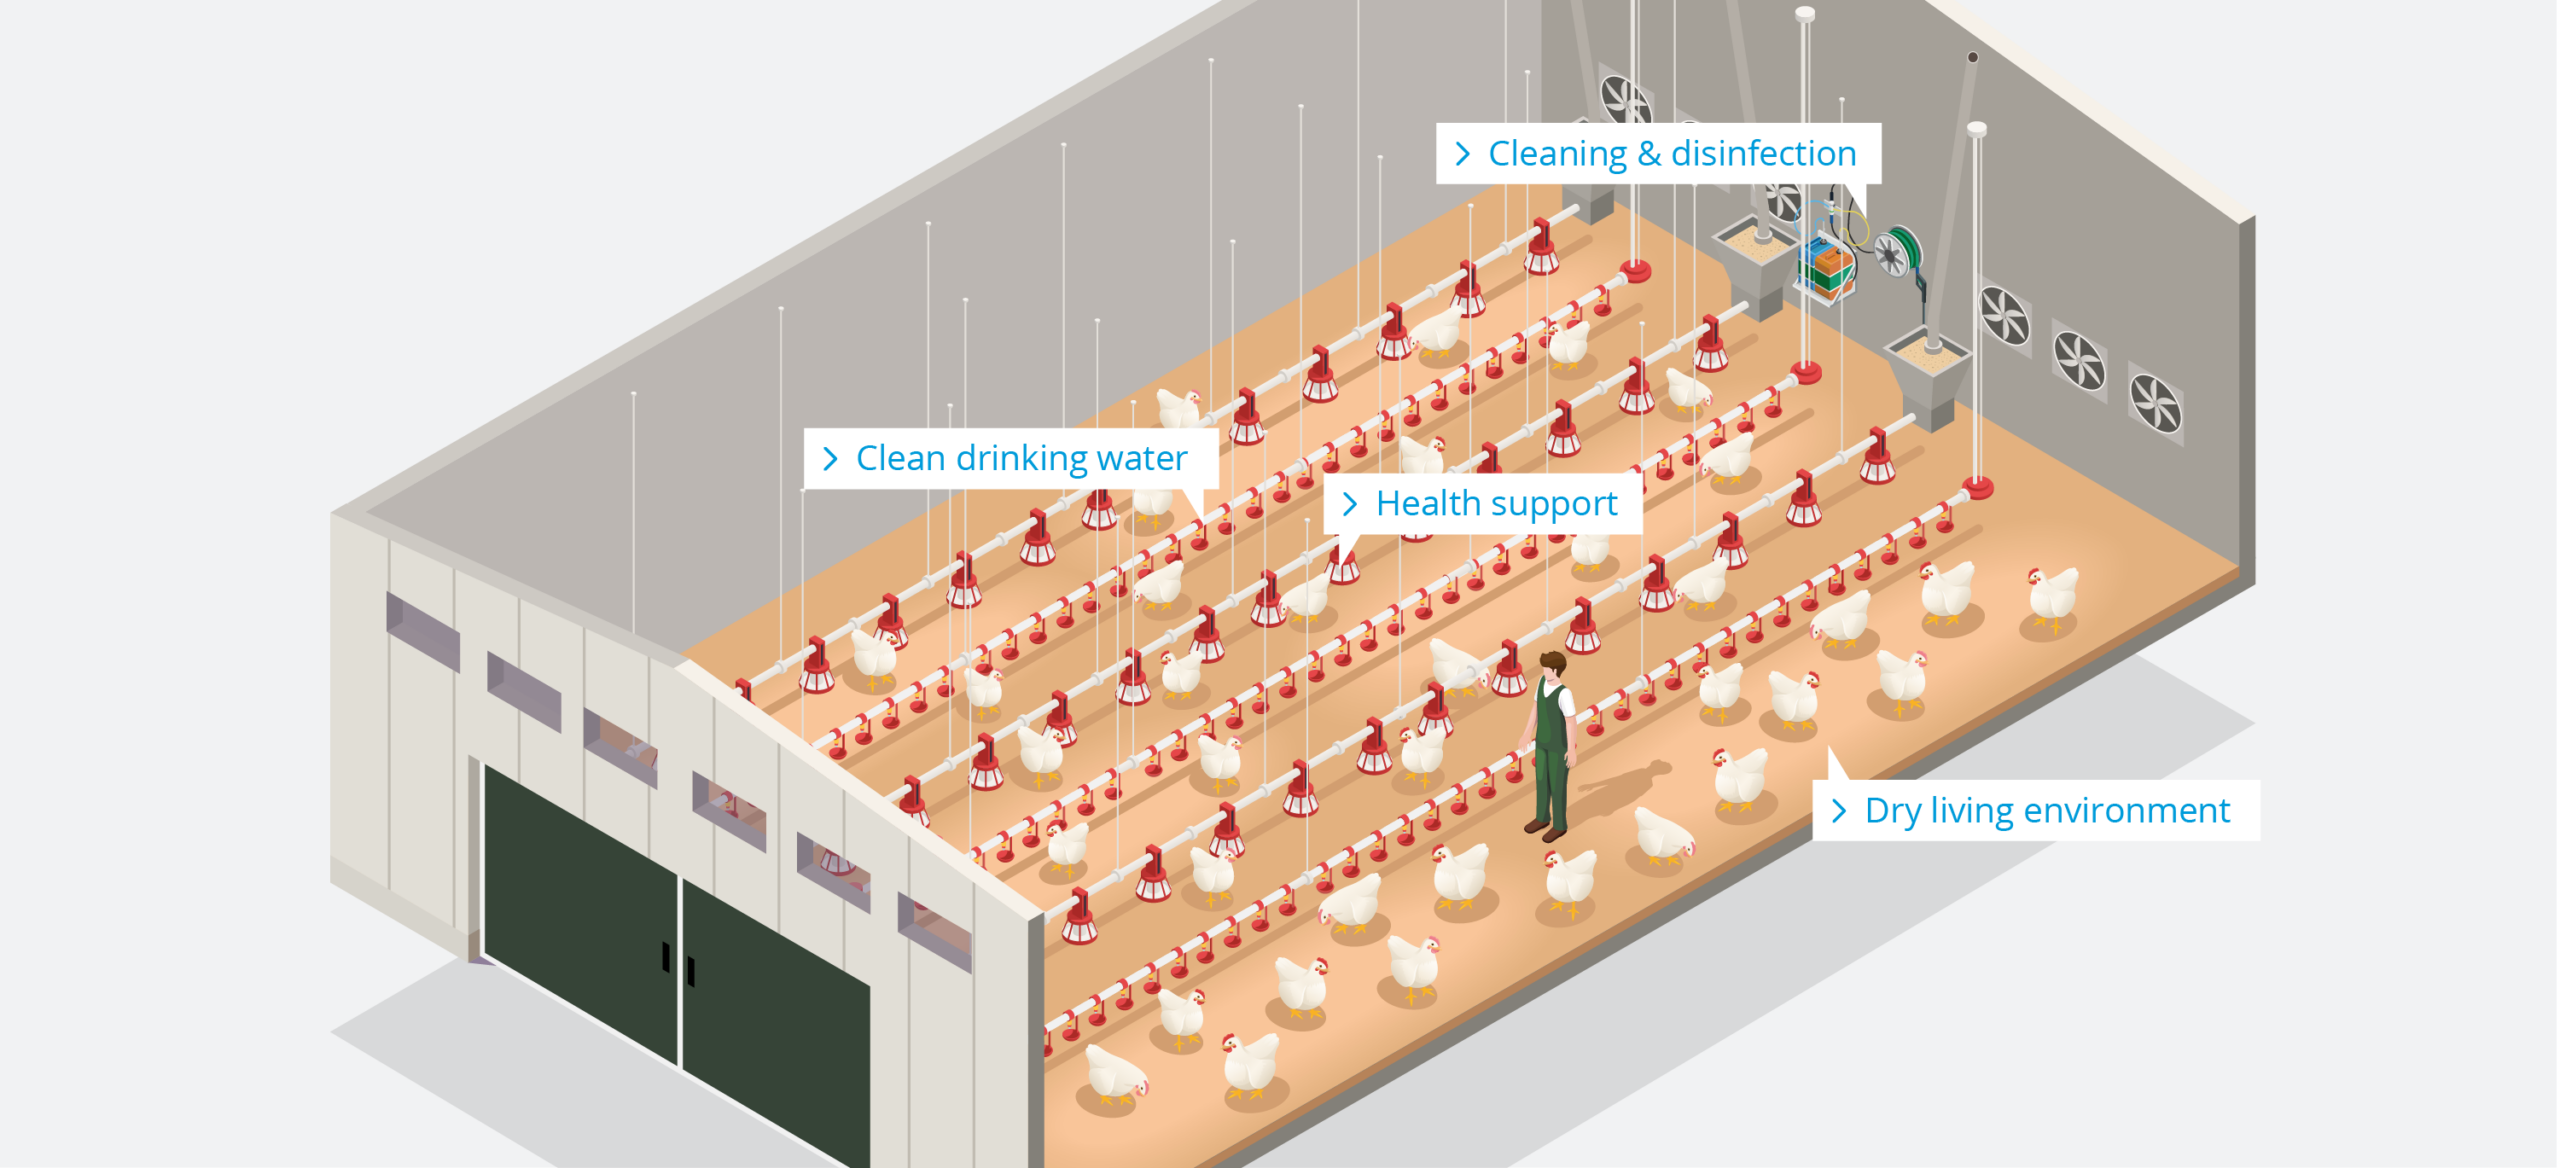 Poultry Farm – Broilers